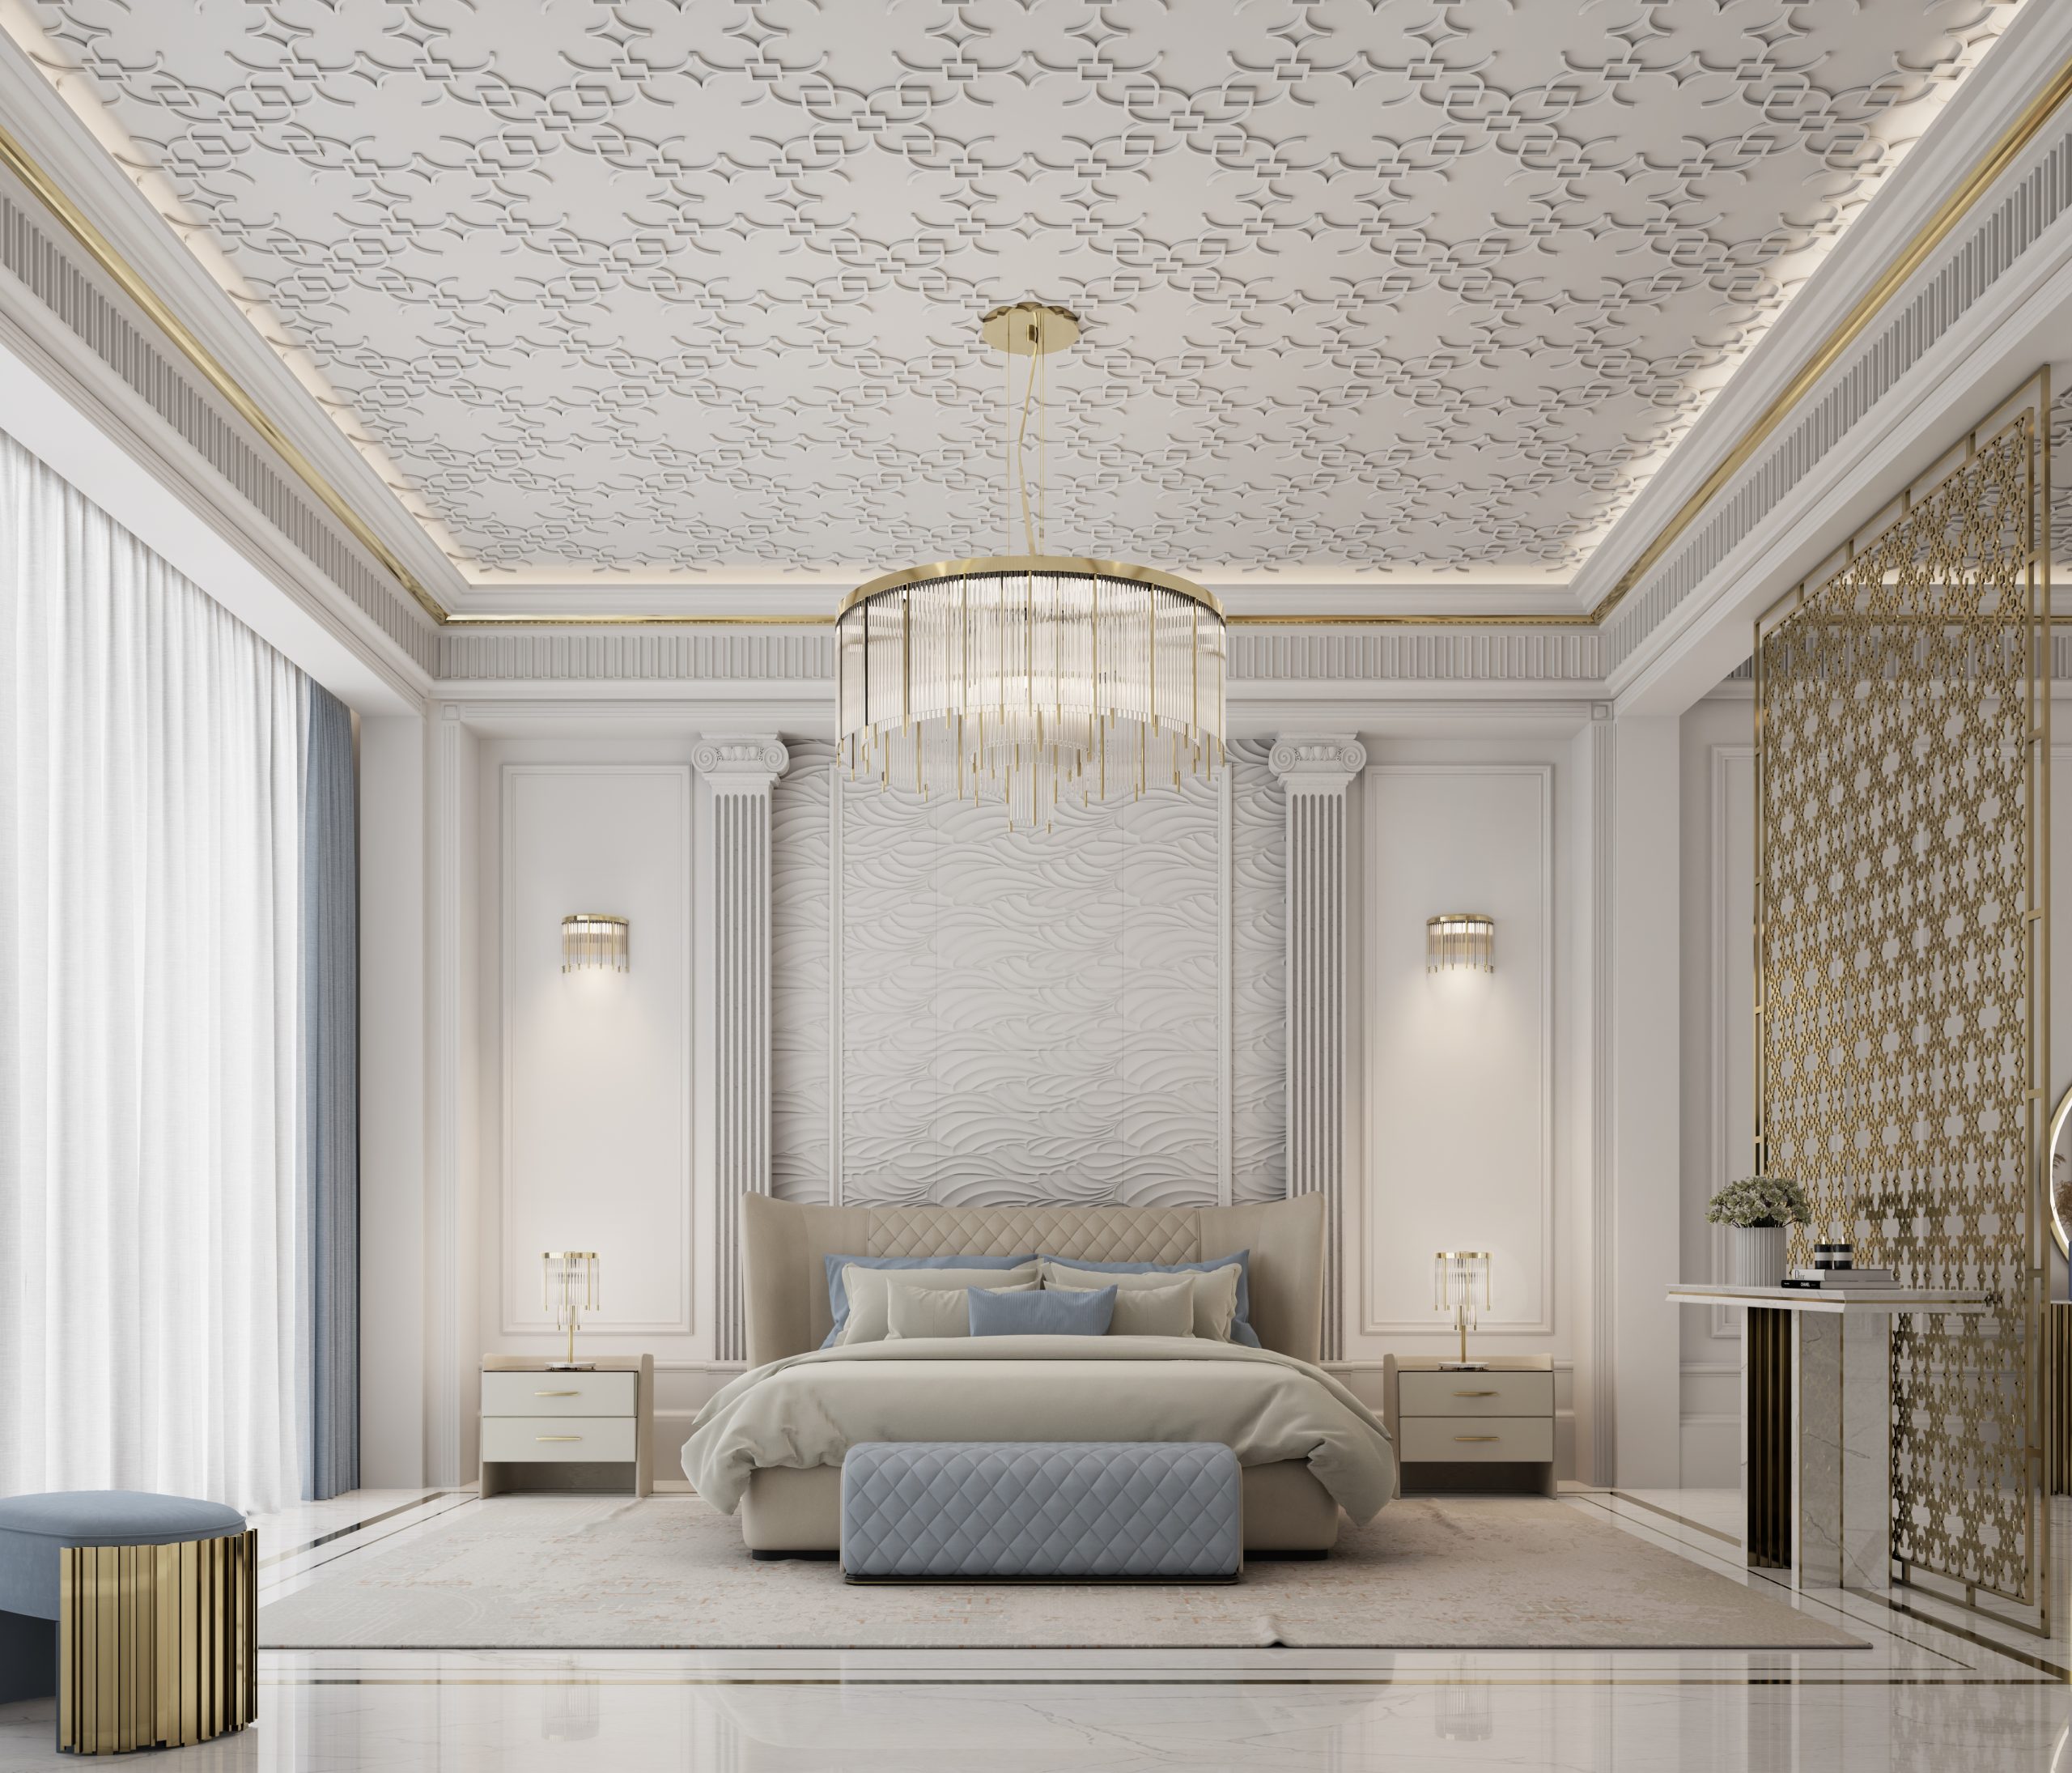 Bedroom Design Ideas From Qatar That Will Leave You In Awe!